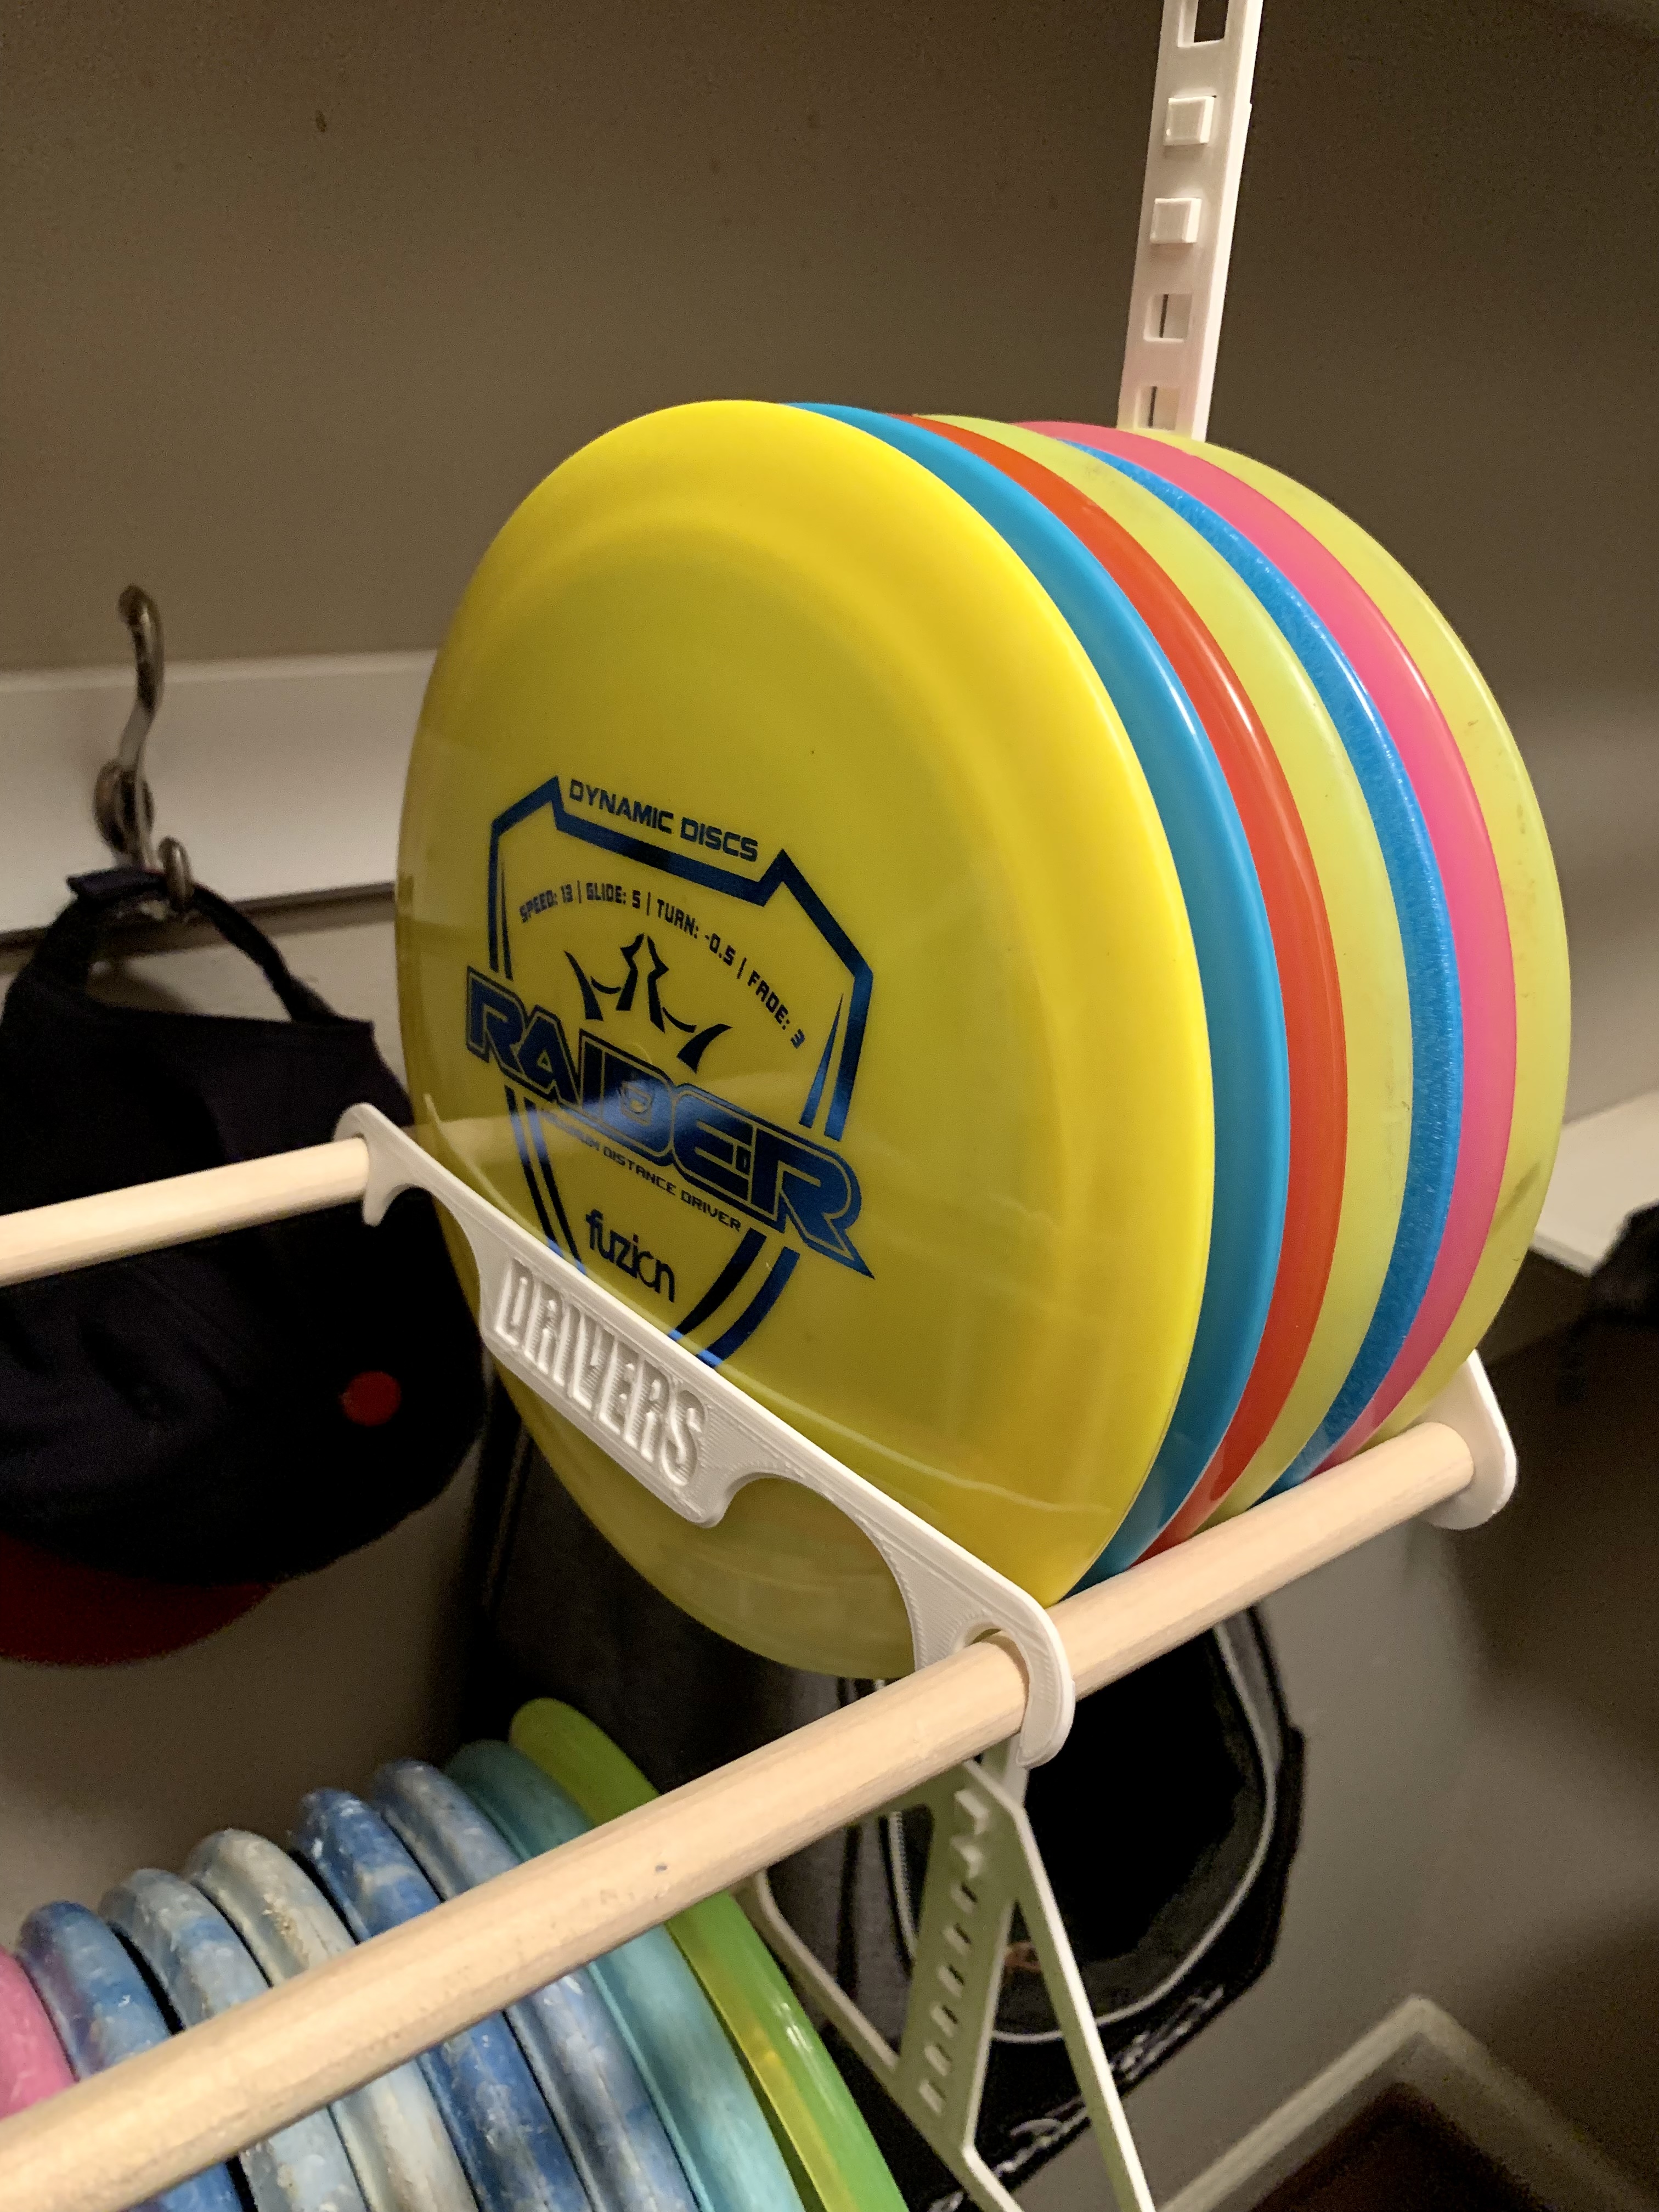 Disc wall hangers for college dorm : r/discgolf